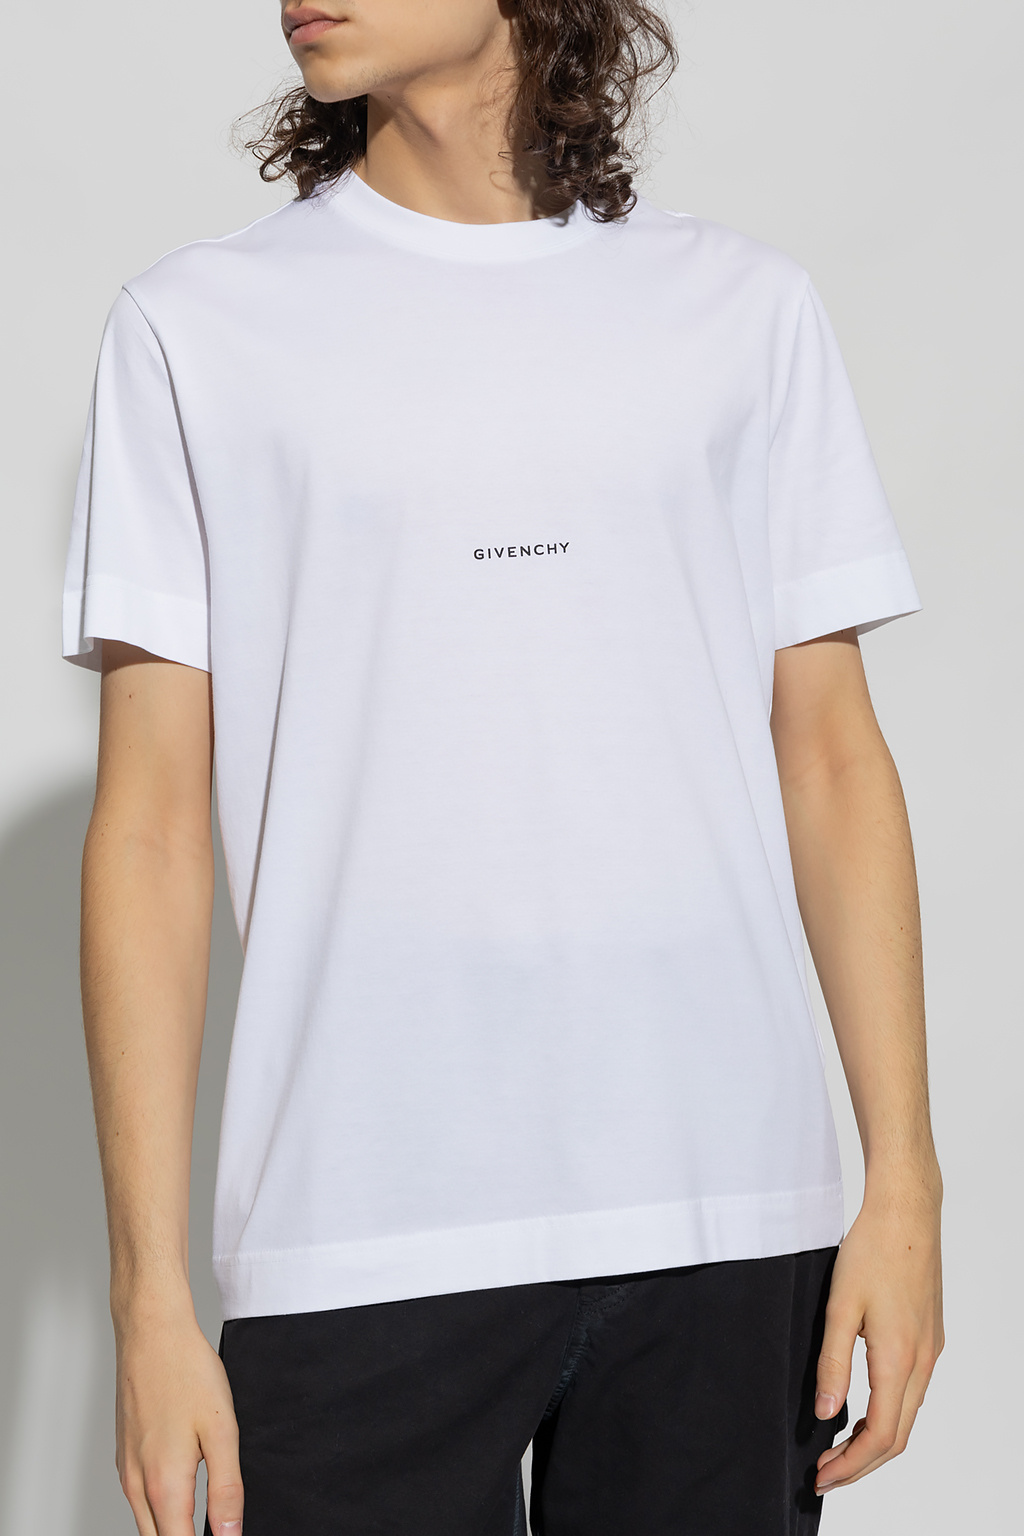 givenchy teint T-shirt with logo